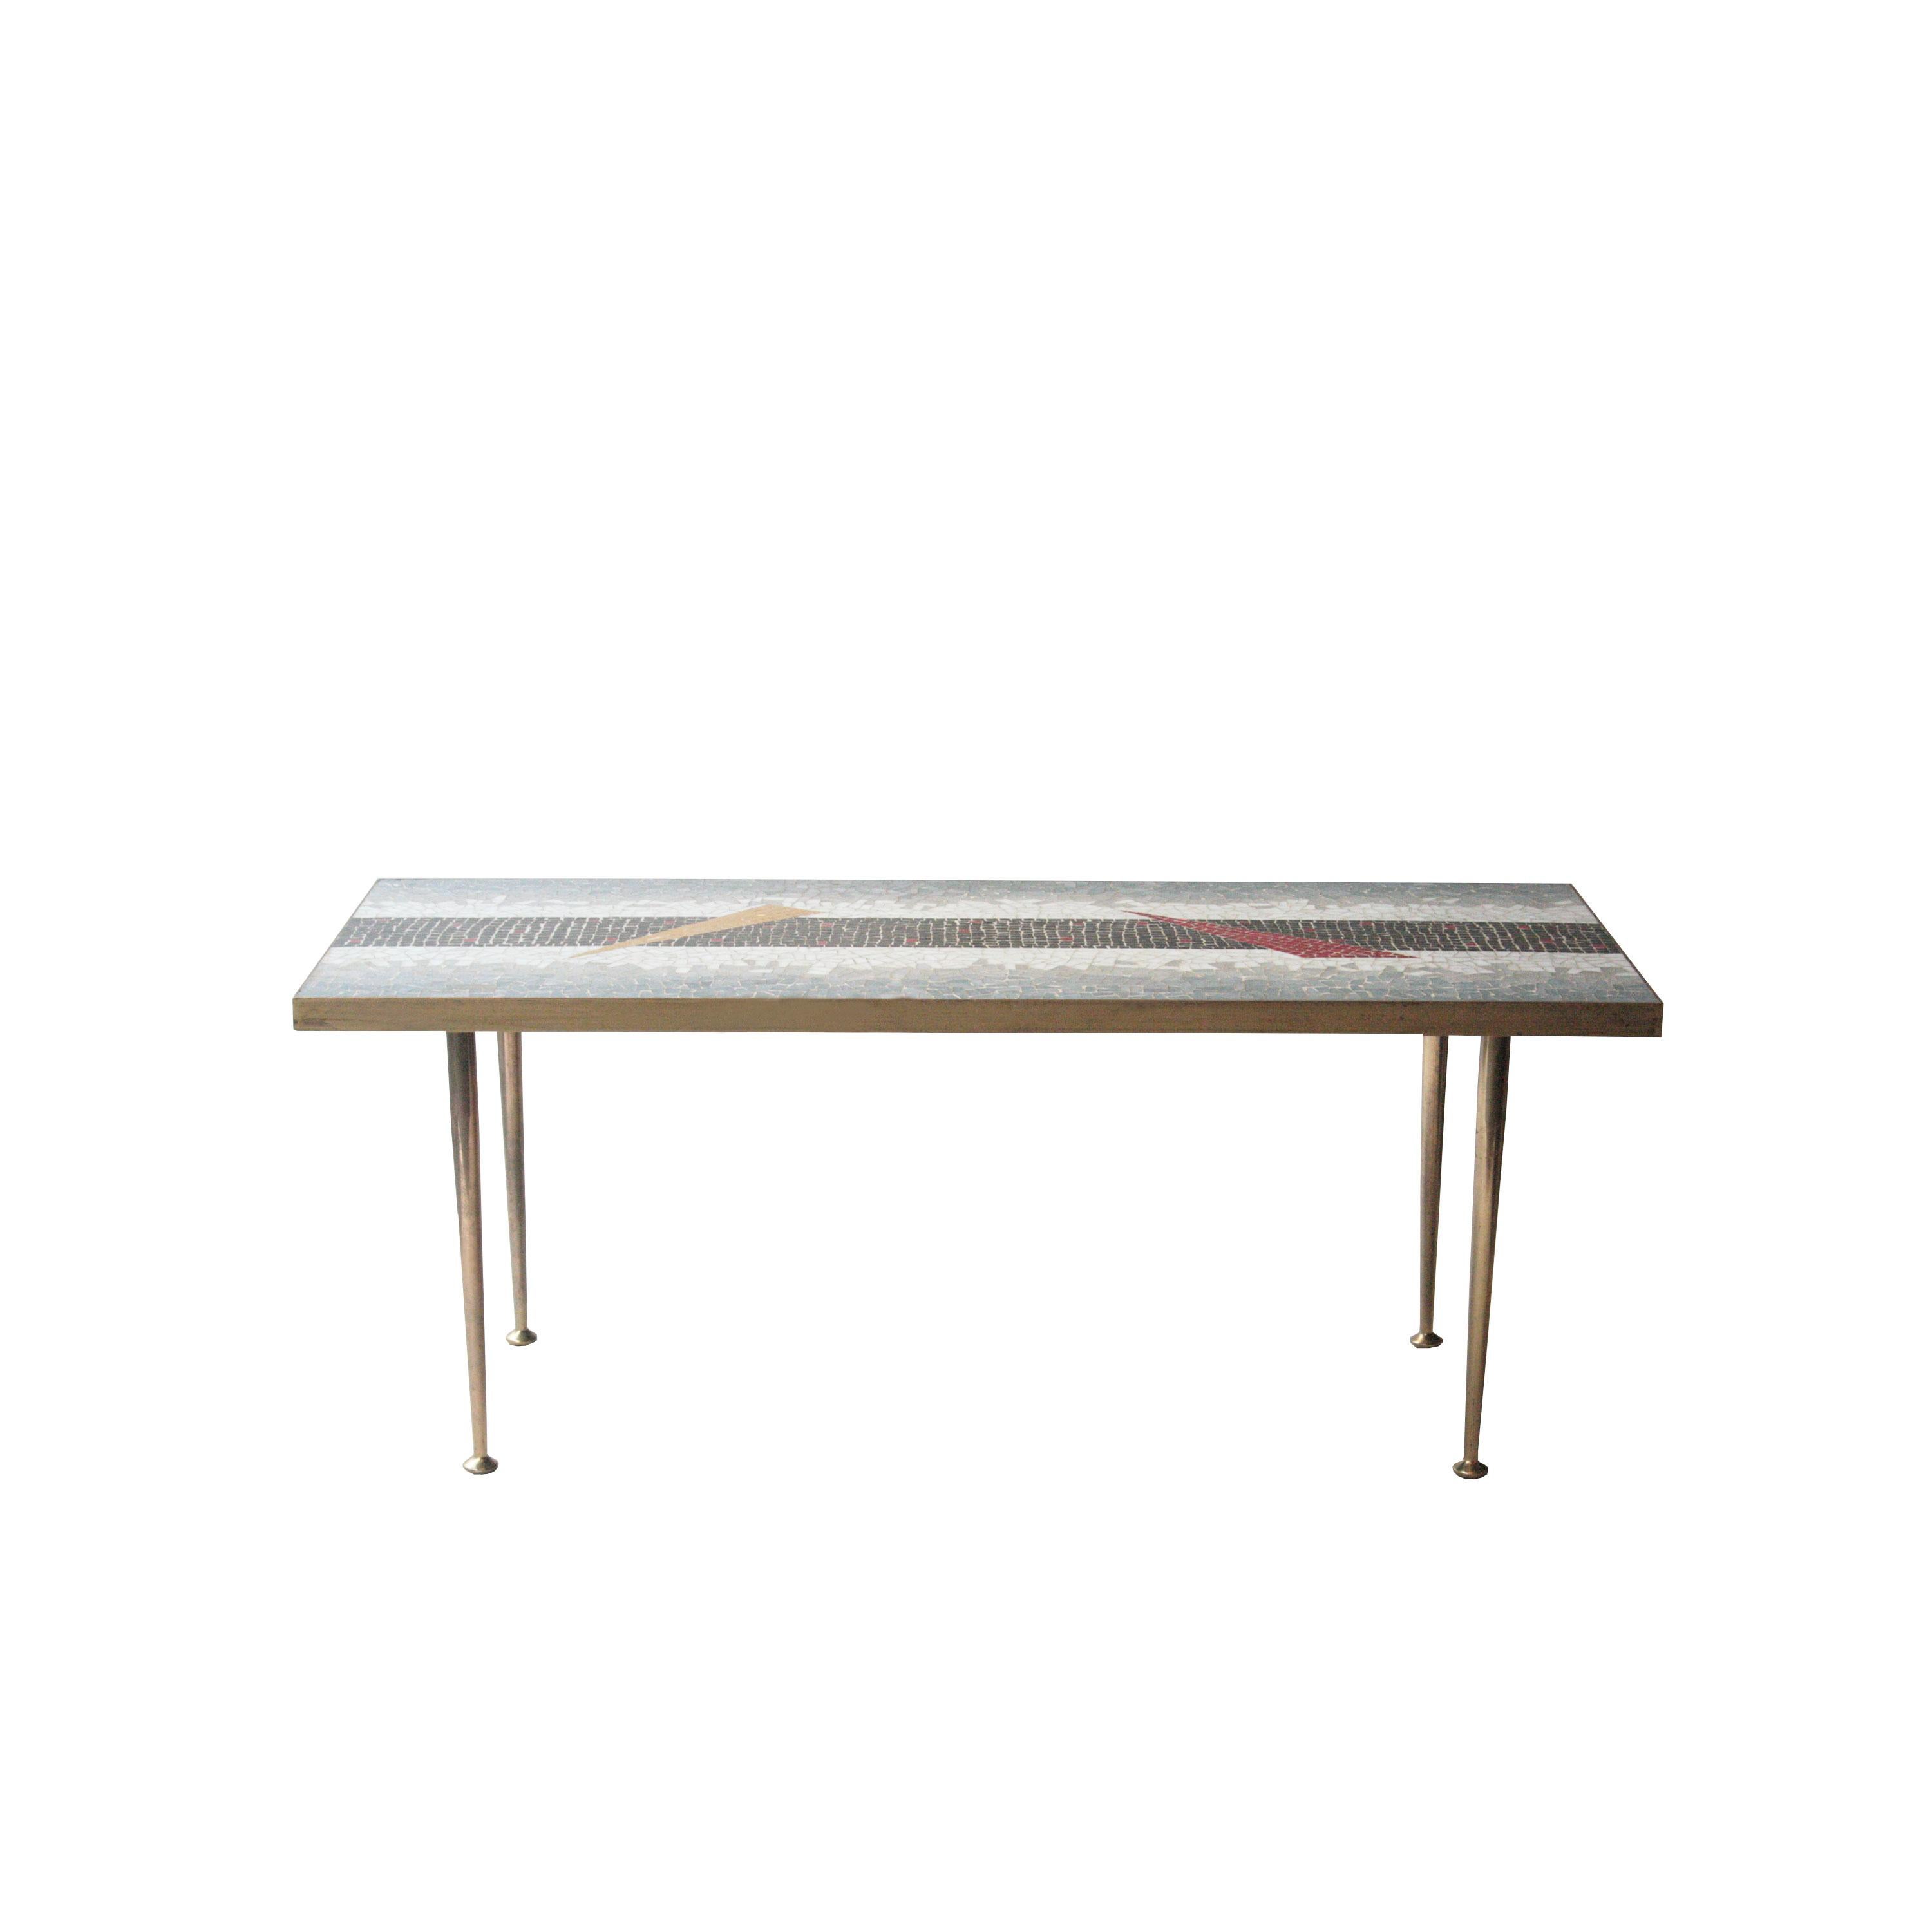 Coffee table with a brass structure, rectangular top in vitrified tiles in various colors.